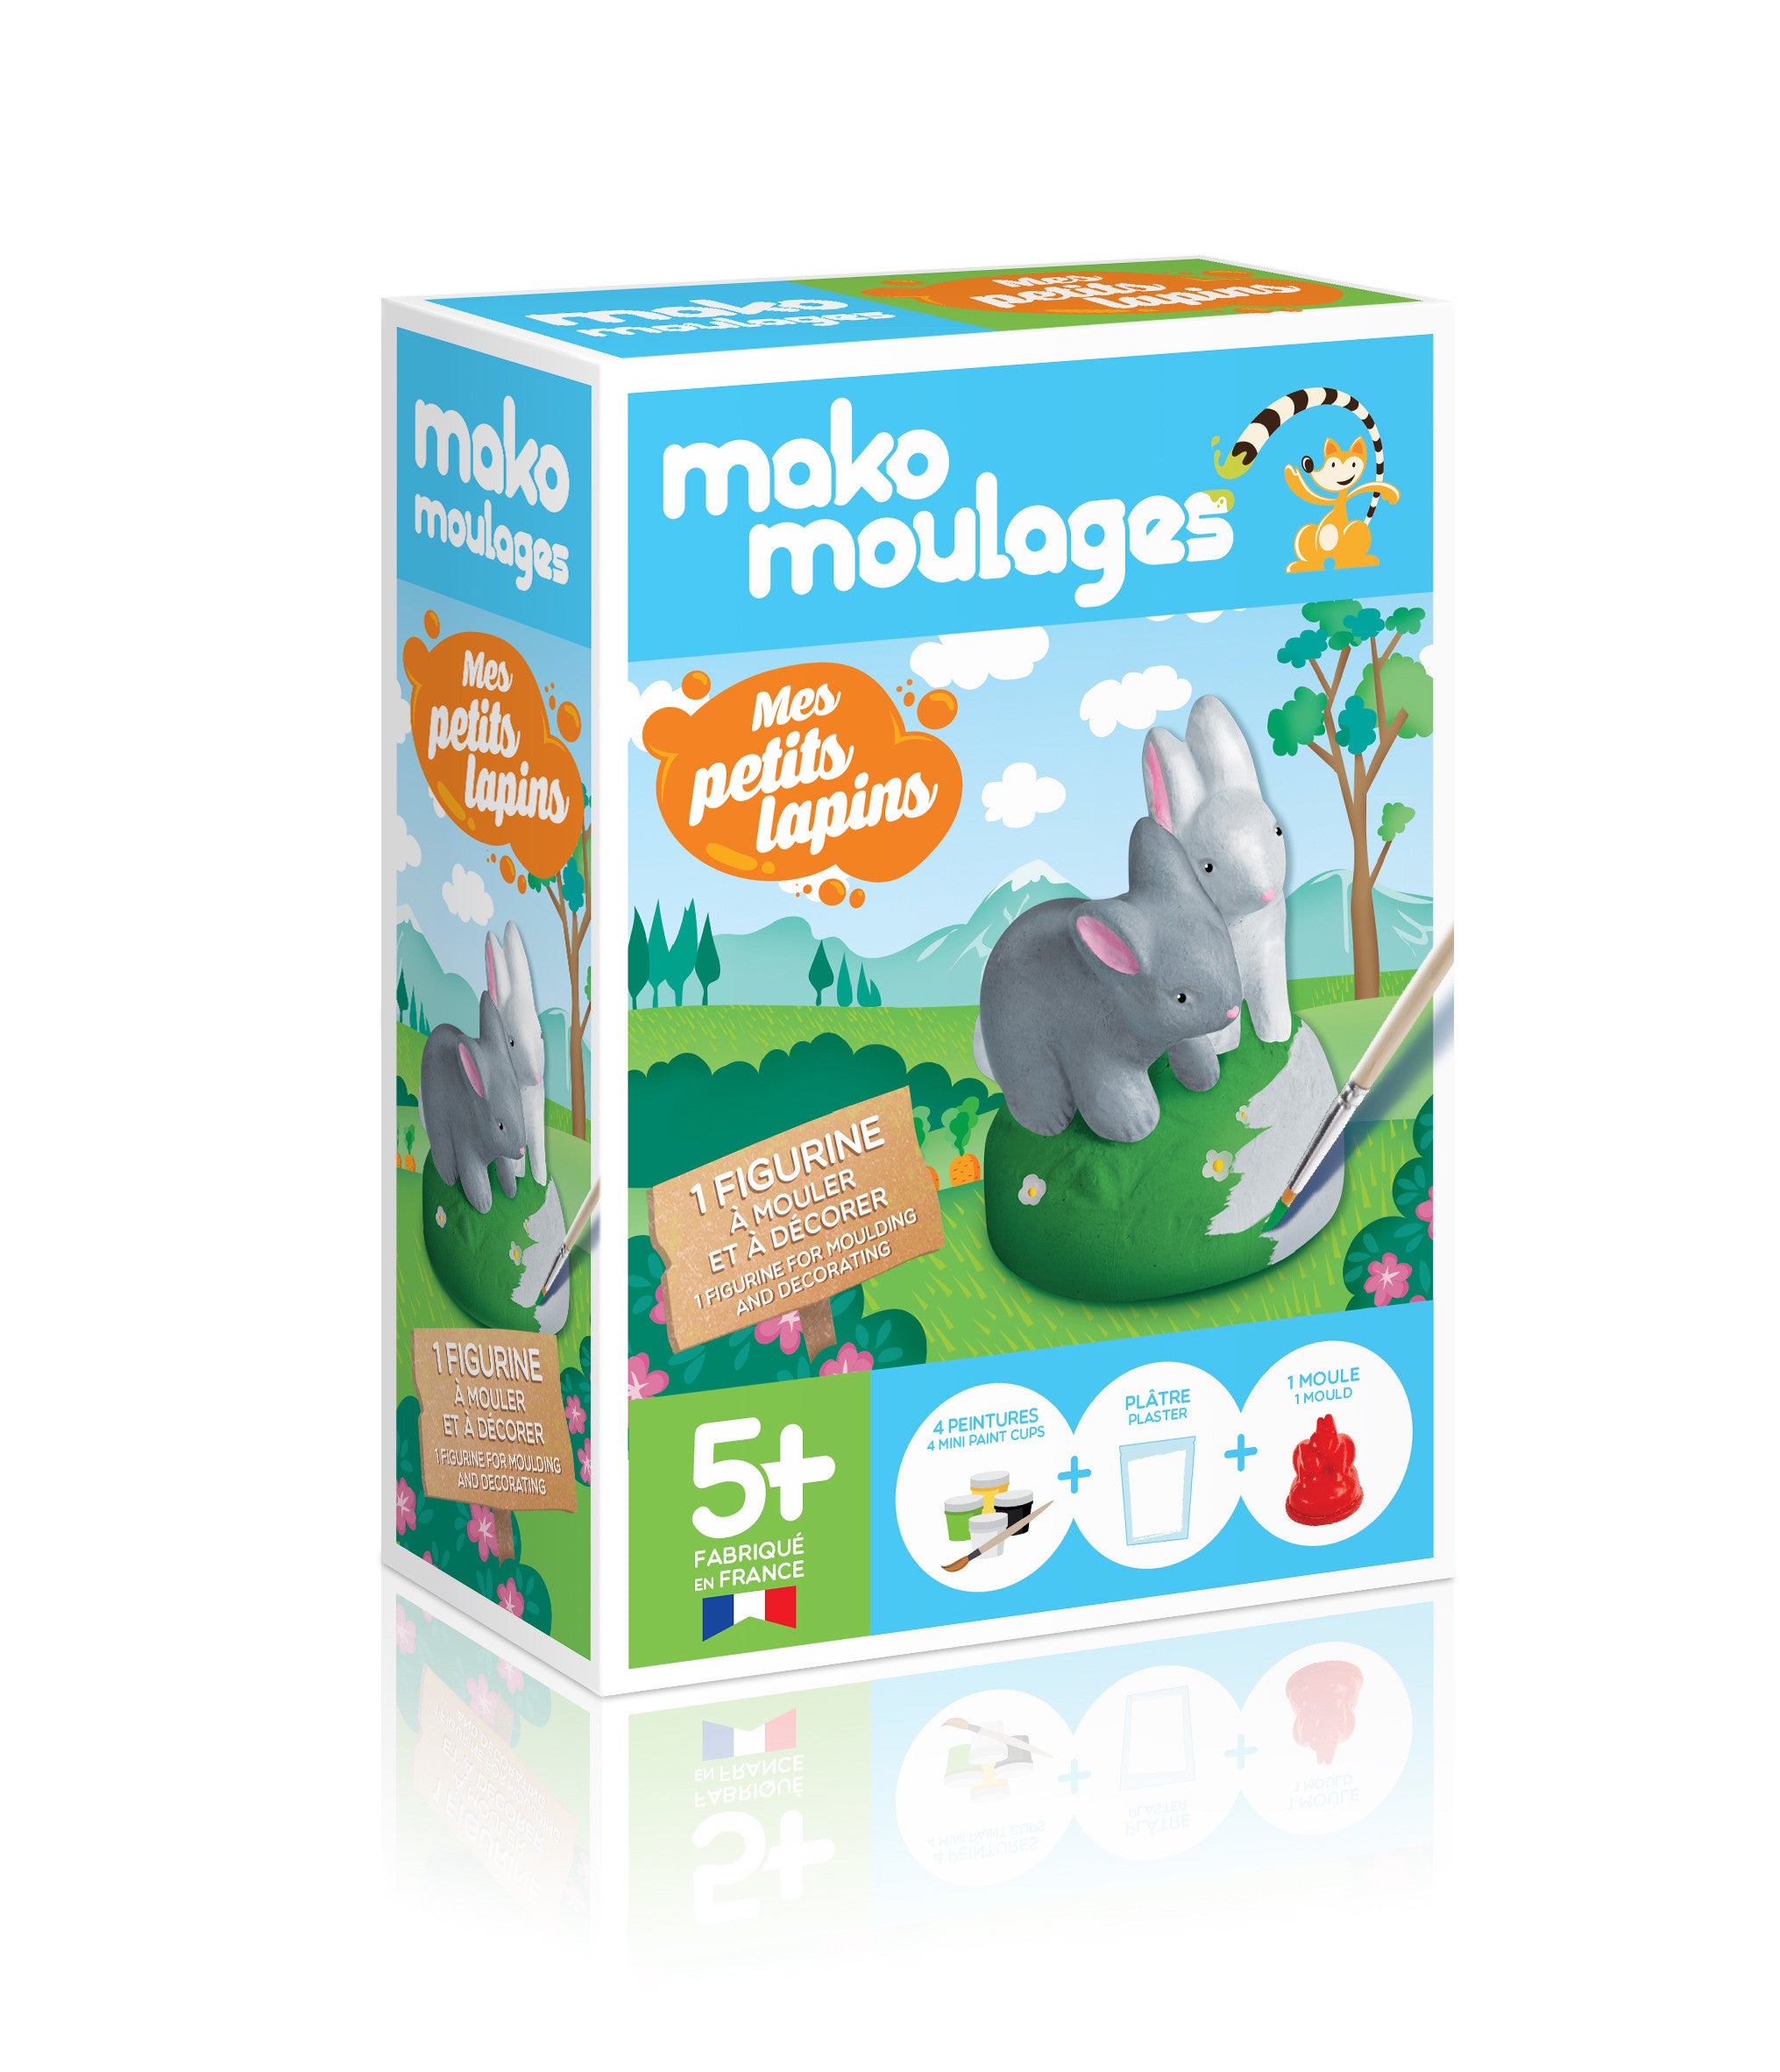 Kit mes petits Lapins - Made in France - Mako Moulages